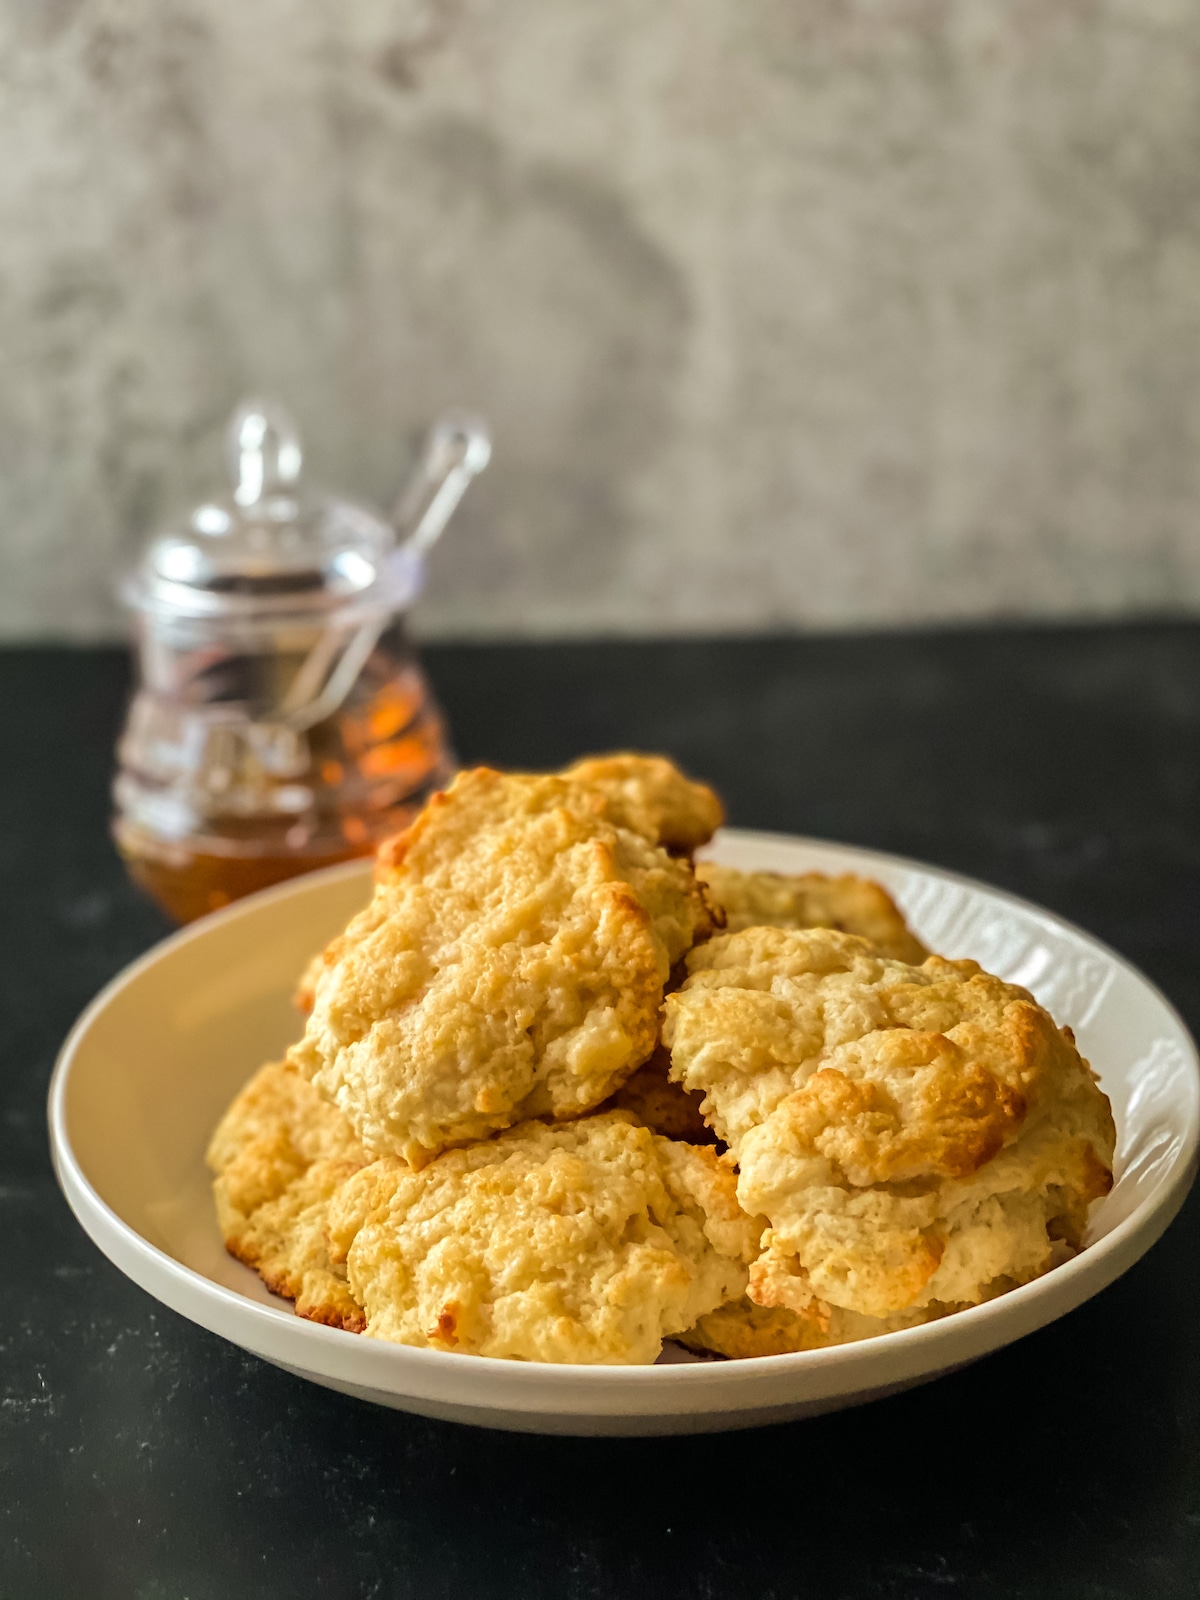 Honey butter biscuits on white bowl sitting on table with glass jar of honey in background